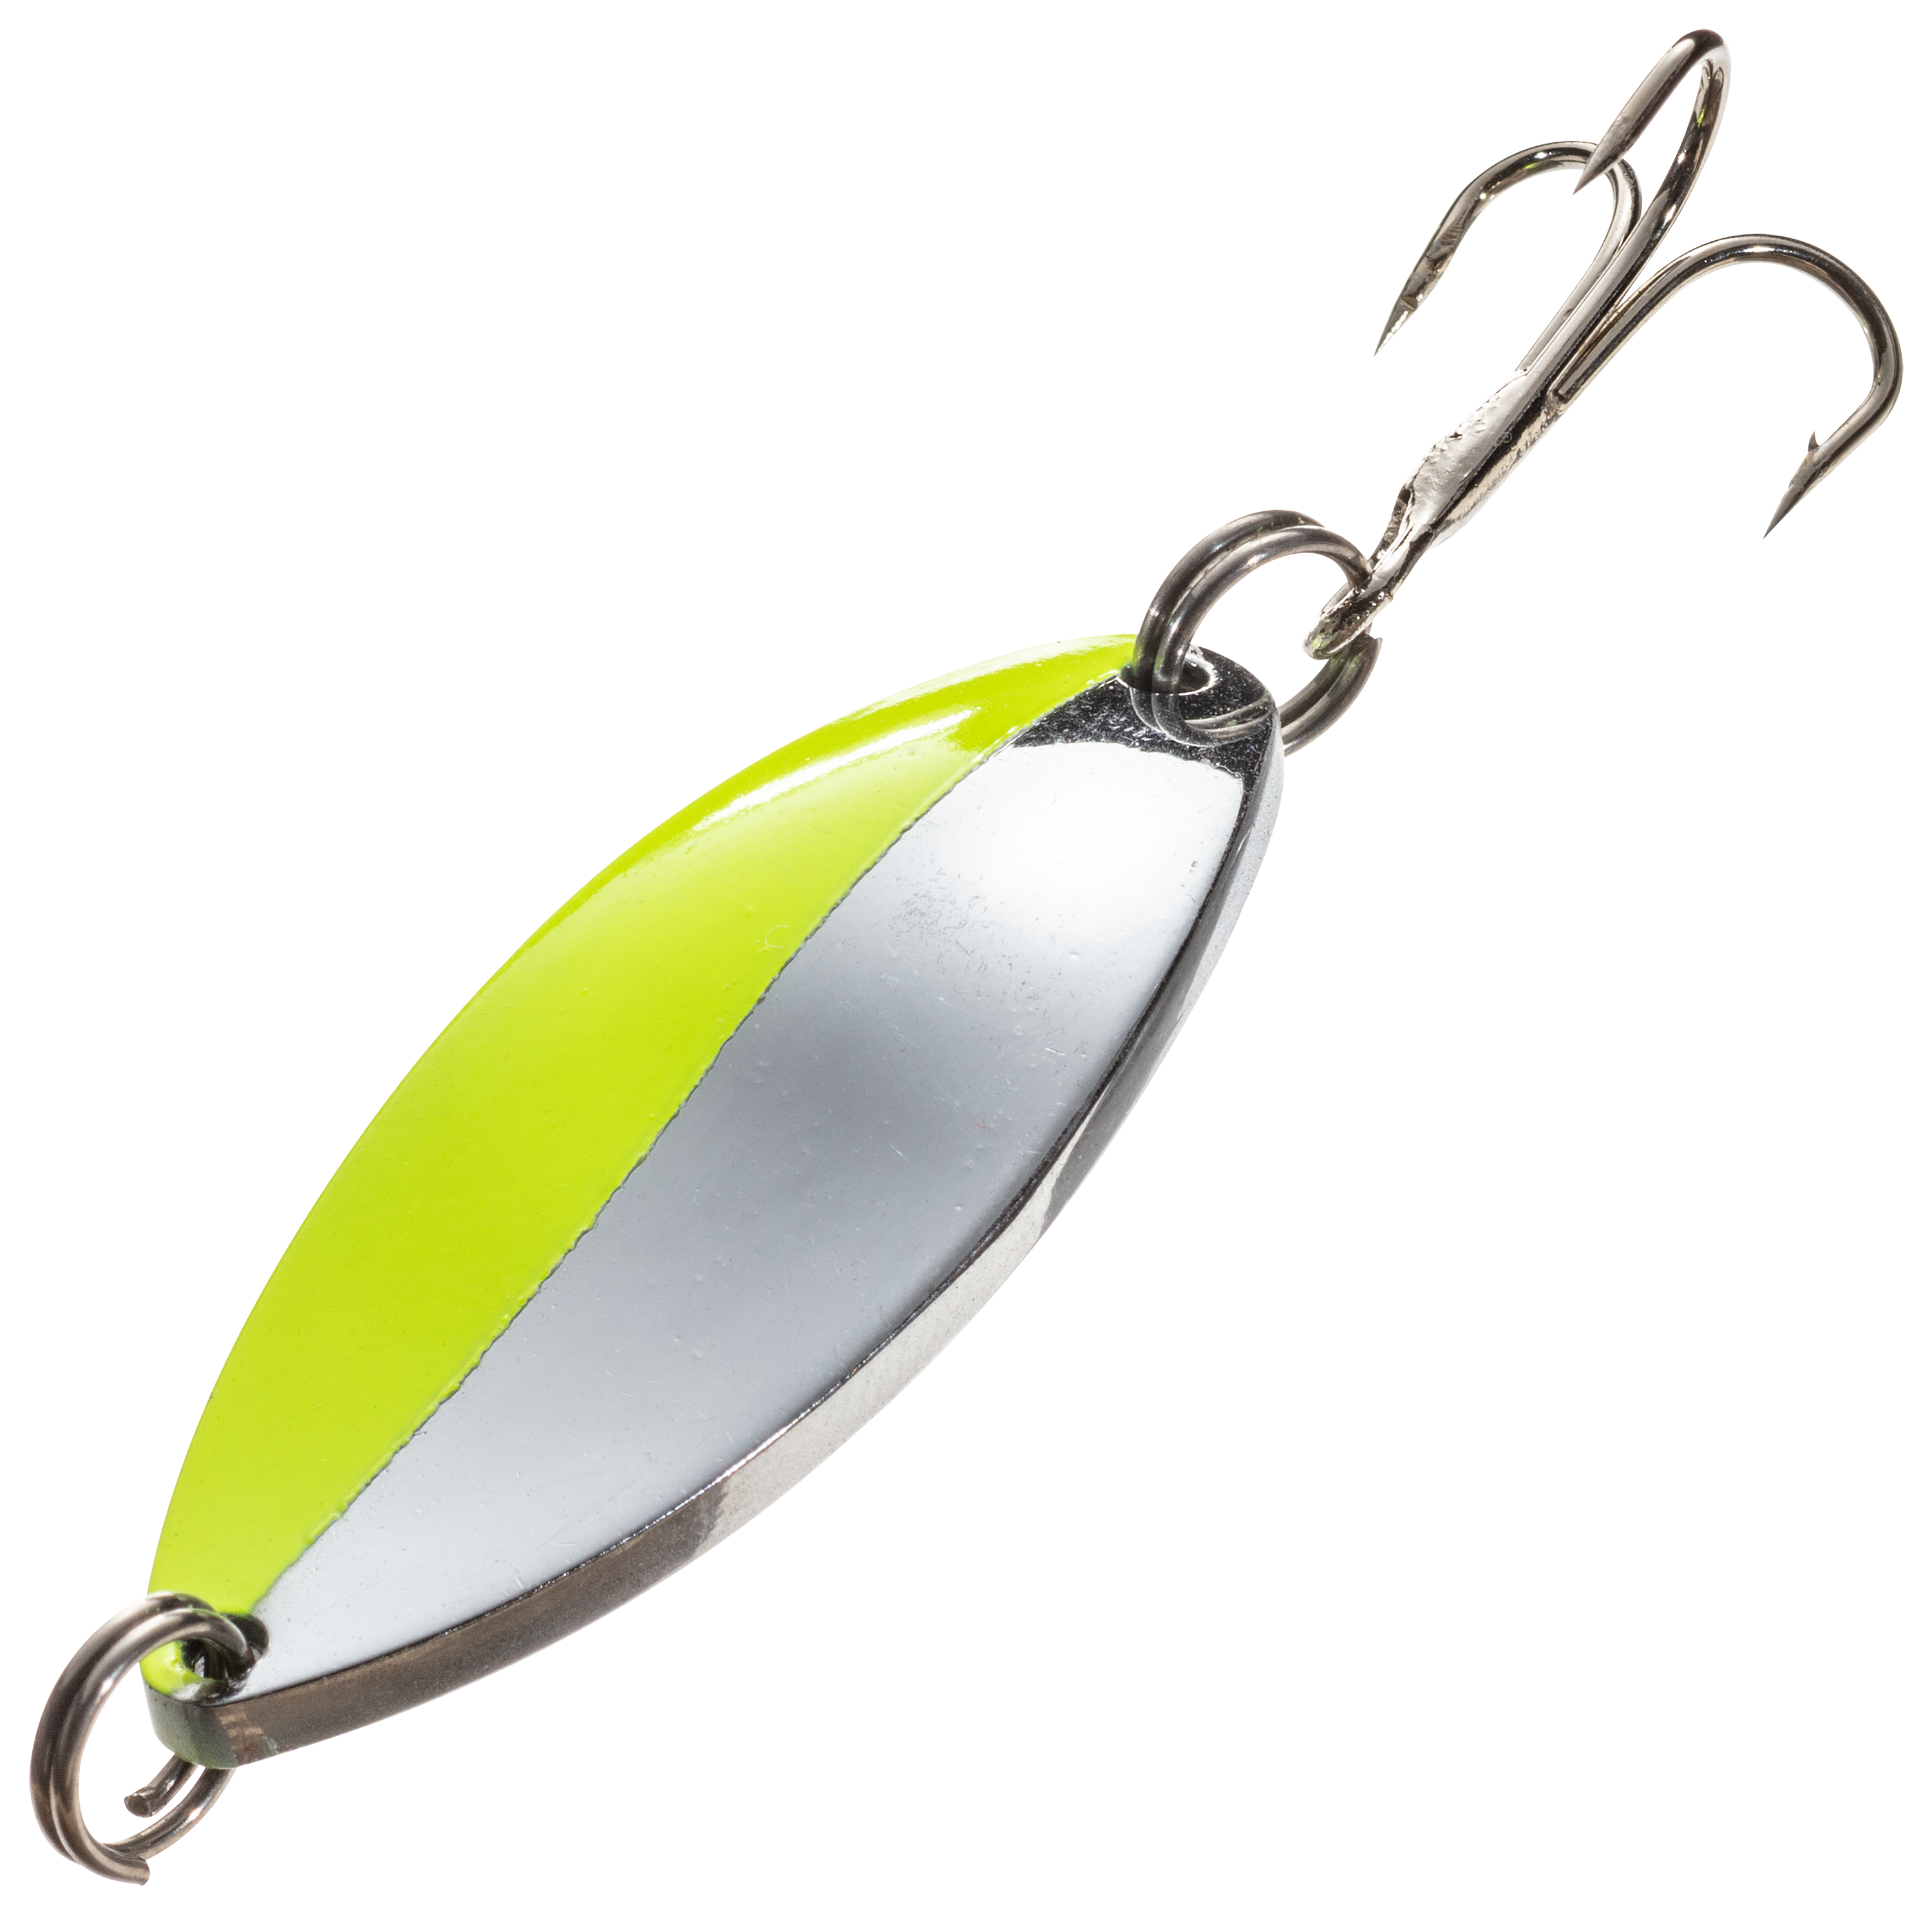 Bass Pro Shops Game Fish Spoon - 1/8 oz. - Nickel Chartreuse